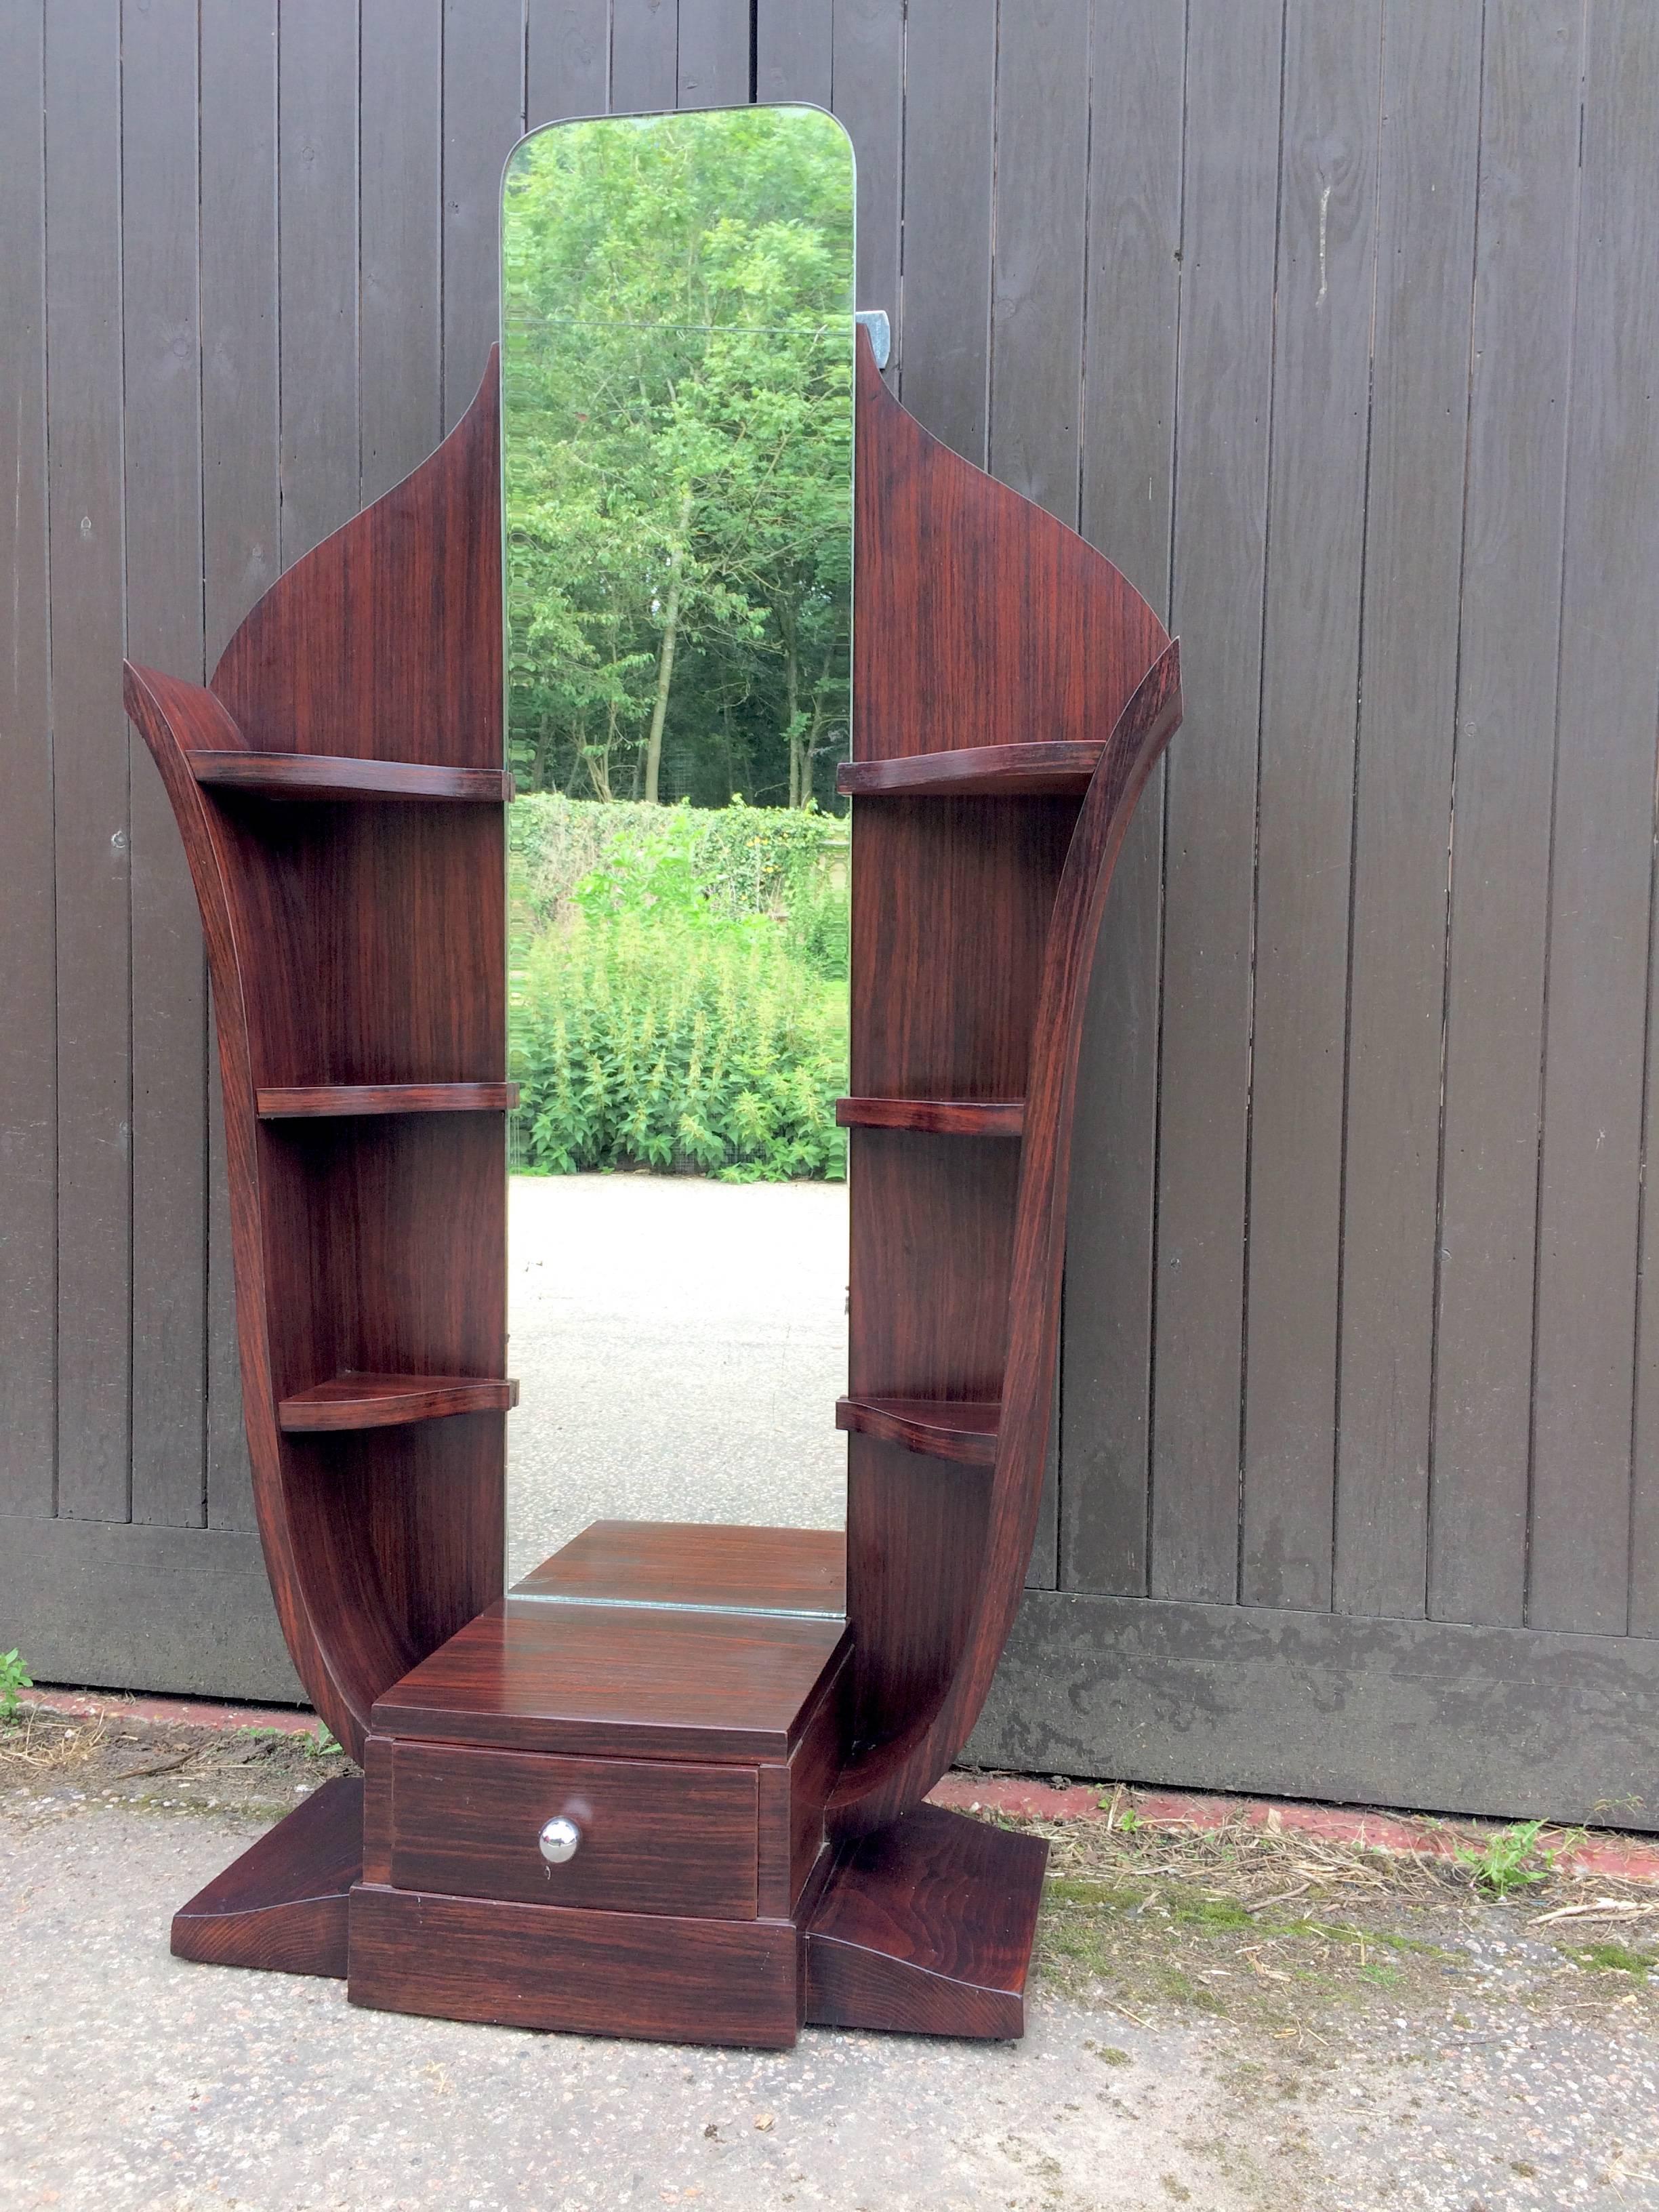 Macassar ebony stand and mirror, apparently known as a psyche mirror. Three Display shelves down each side of the mirror and a central lower drawer over the shaped plinth with a chromed metal handle. Could be used as a hall stand. Excellent